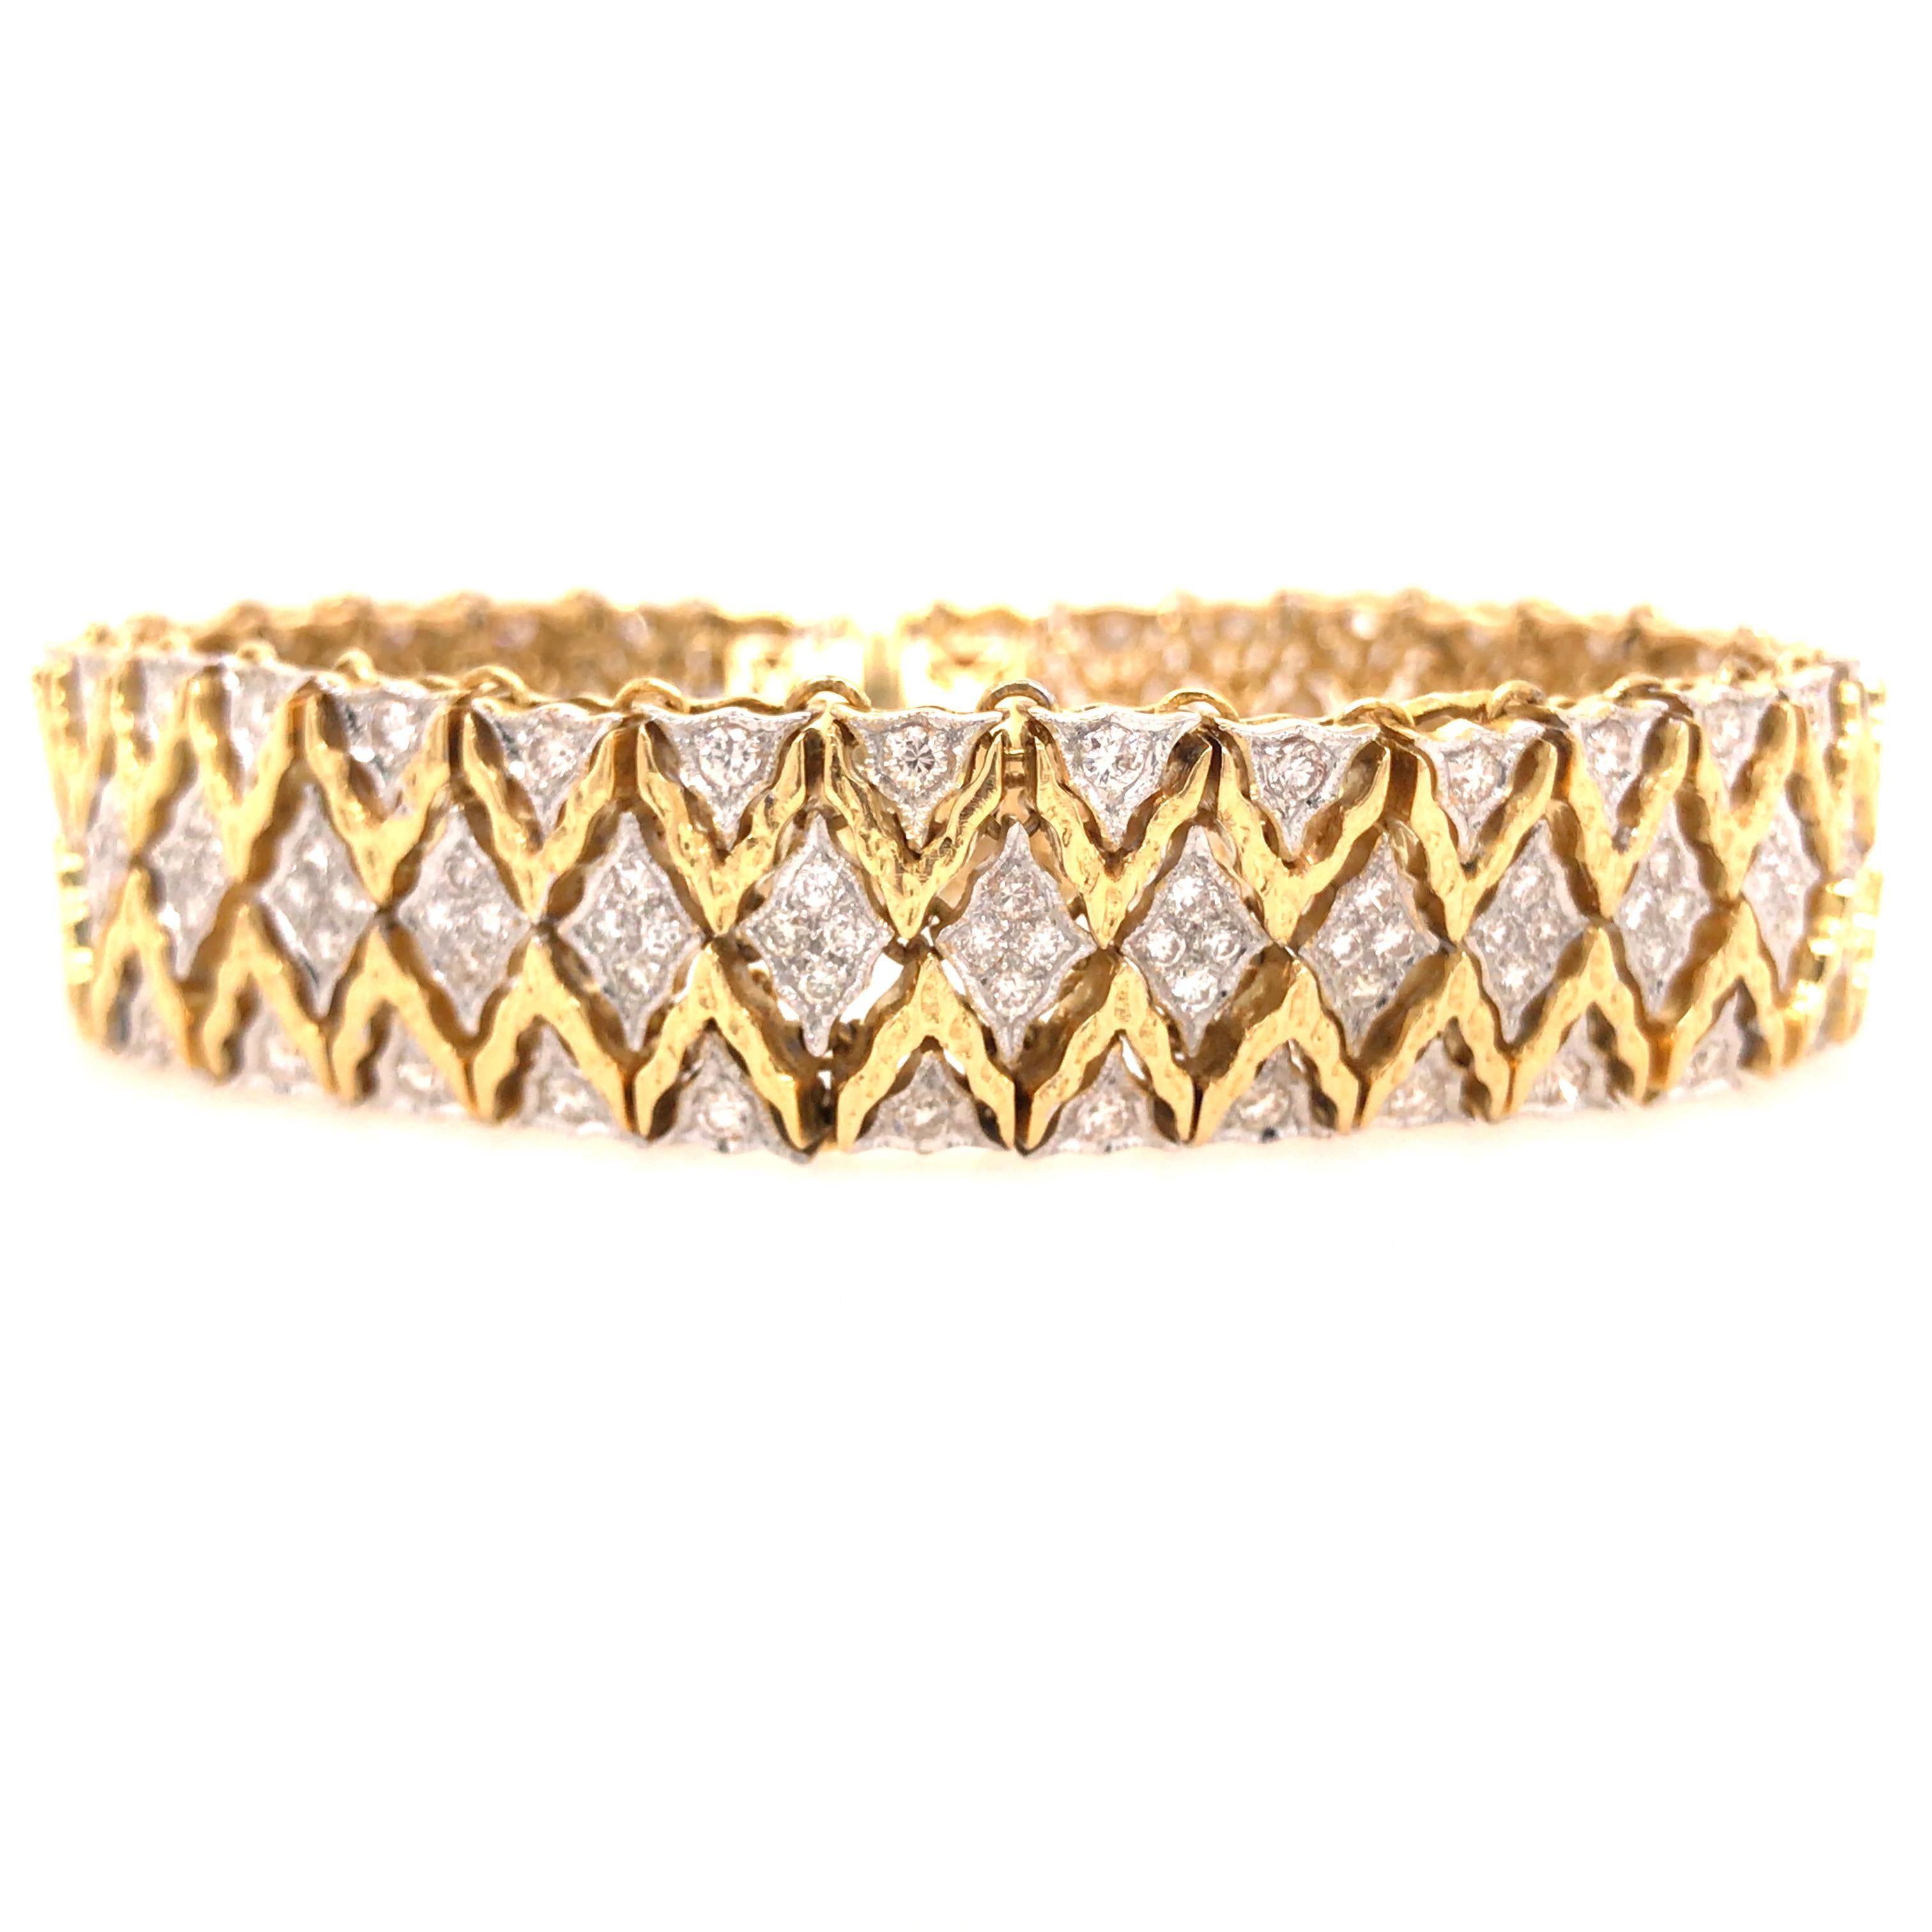 Diamond Weave Bracelet in 18K Two-Tone Gold.  The flexible woven Bracelet is expertly set with Round Brilliant Cut Diamonds weighing 5.03 carat total weight, G-H in color and VS-SI in clarity.  The Bracelet measures 7 inch in length and 5/8 inch in